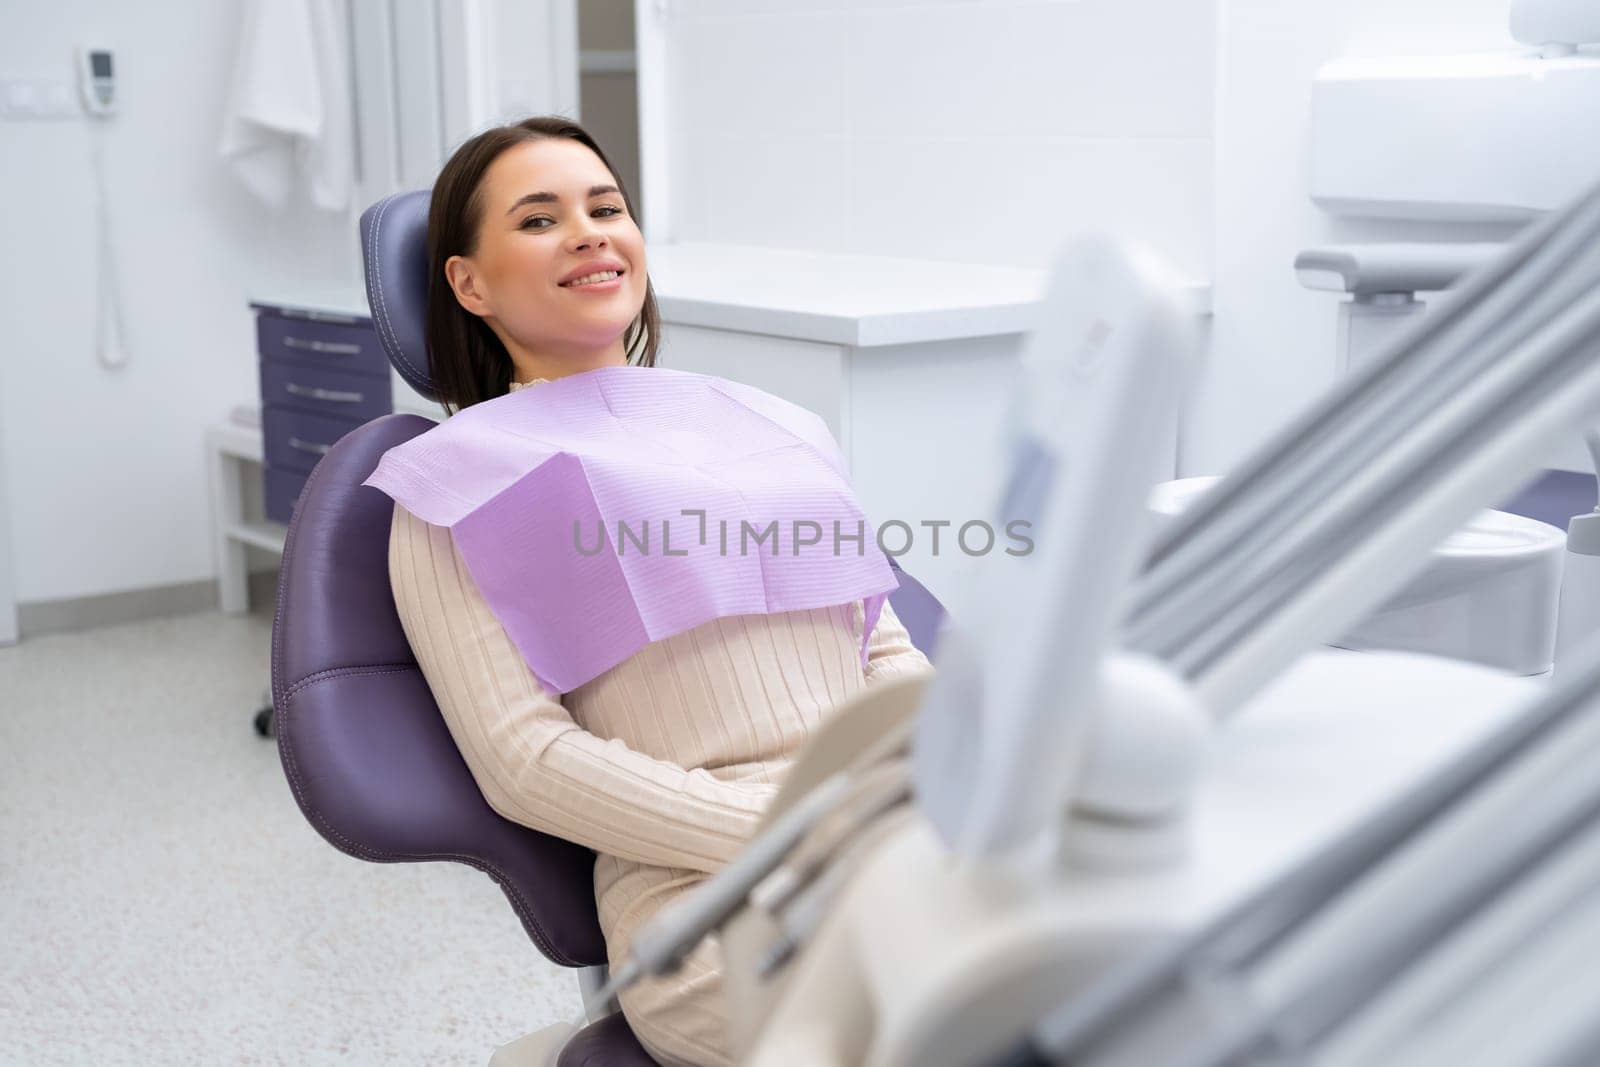 A smiling woman sitting in a dental chair and waiting for a checkup in the clinic.